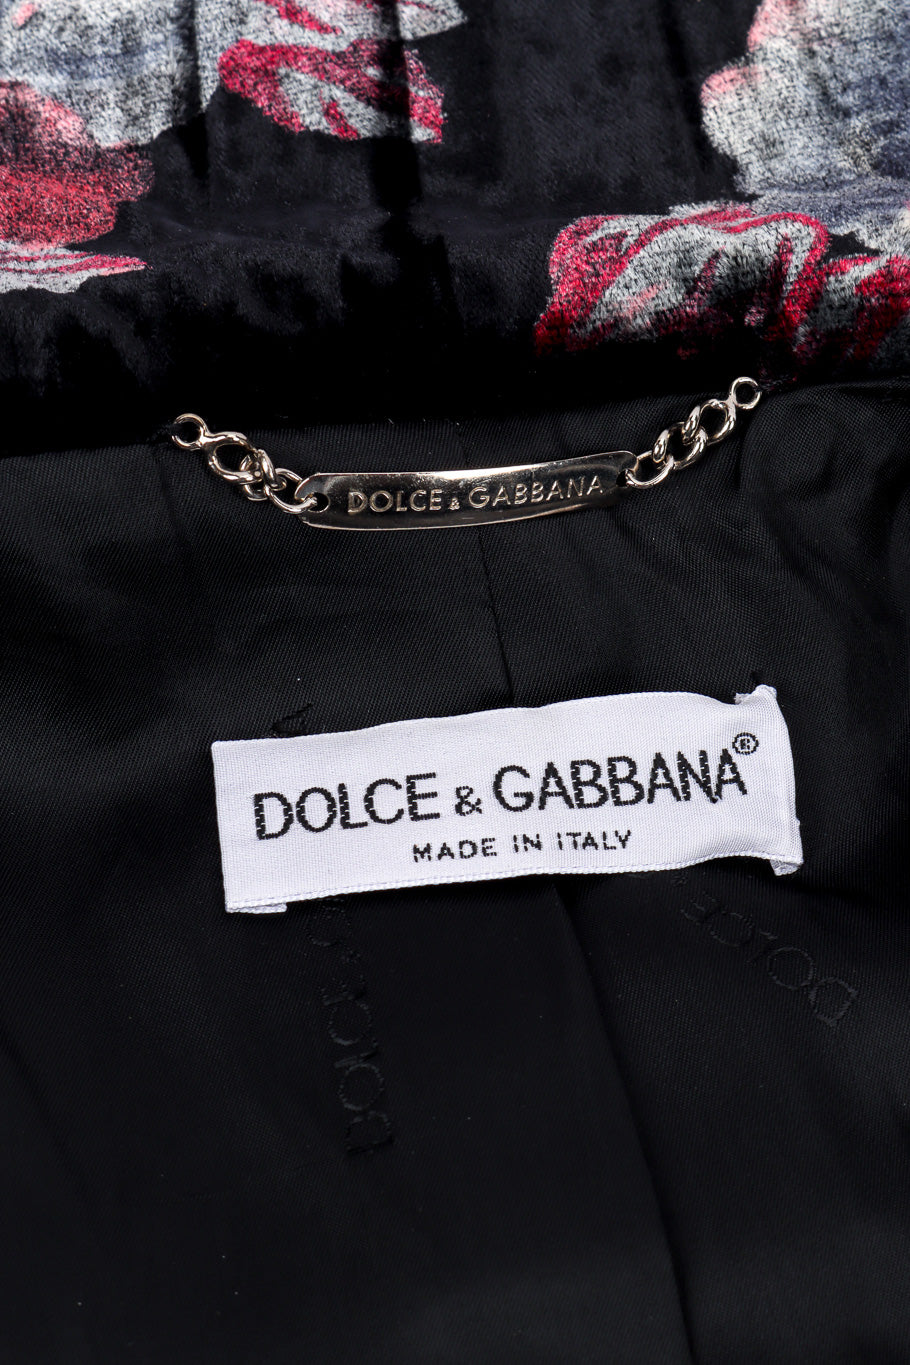 Dolce and Gabbana Floral Velvet Jacket and Pant Set signature label and chain closeup @recessla